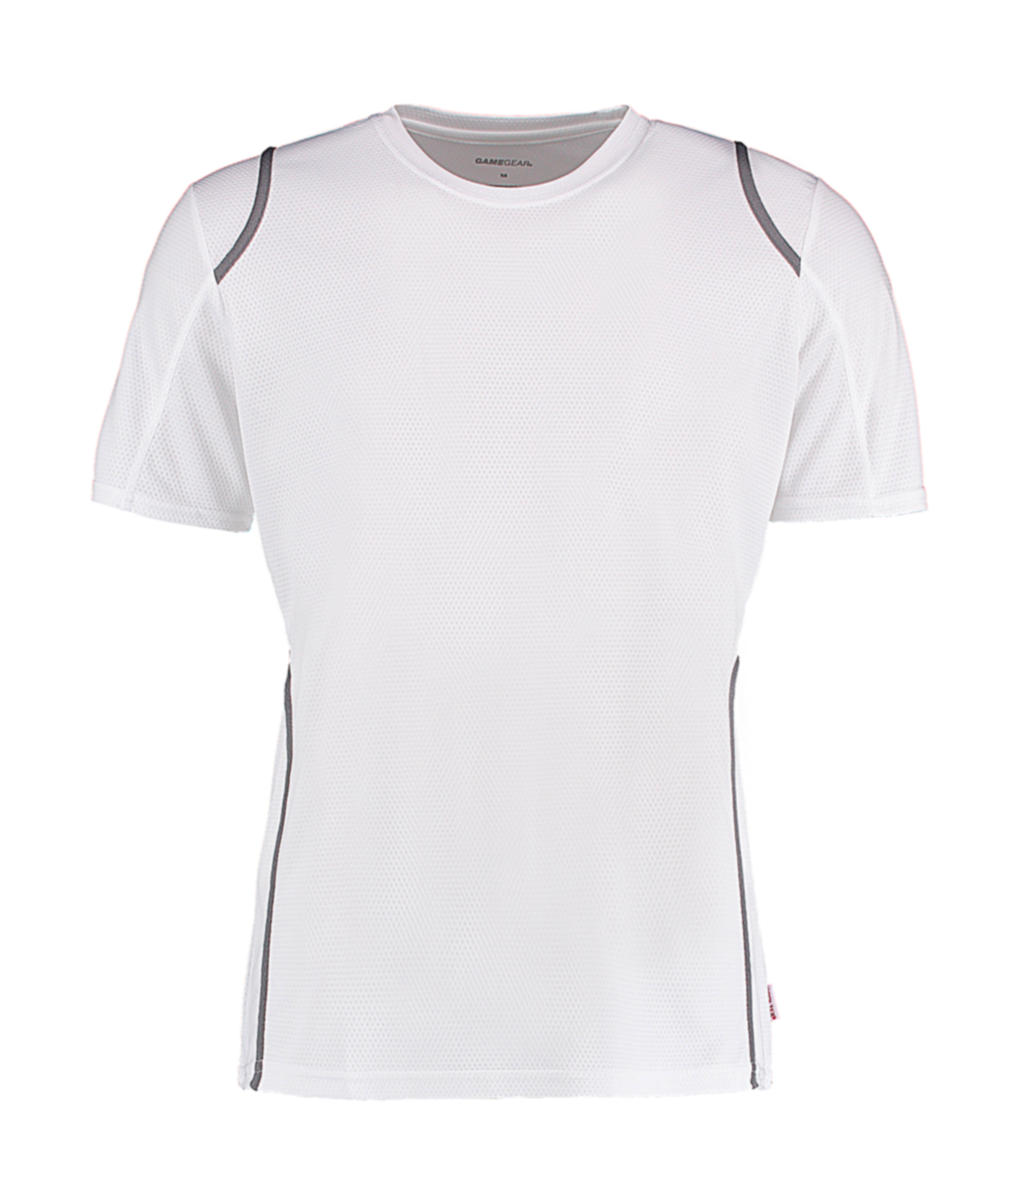  Regular Fit Cooltex? Contrast Tee in Farbe White/Grey